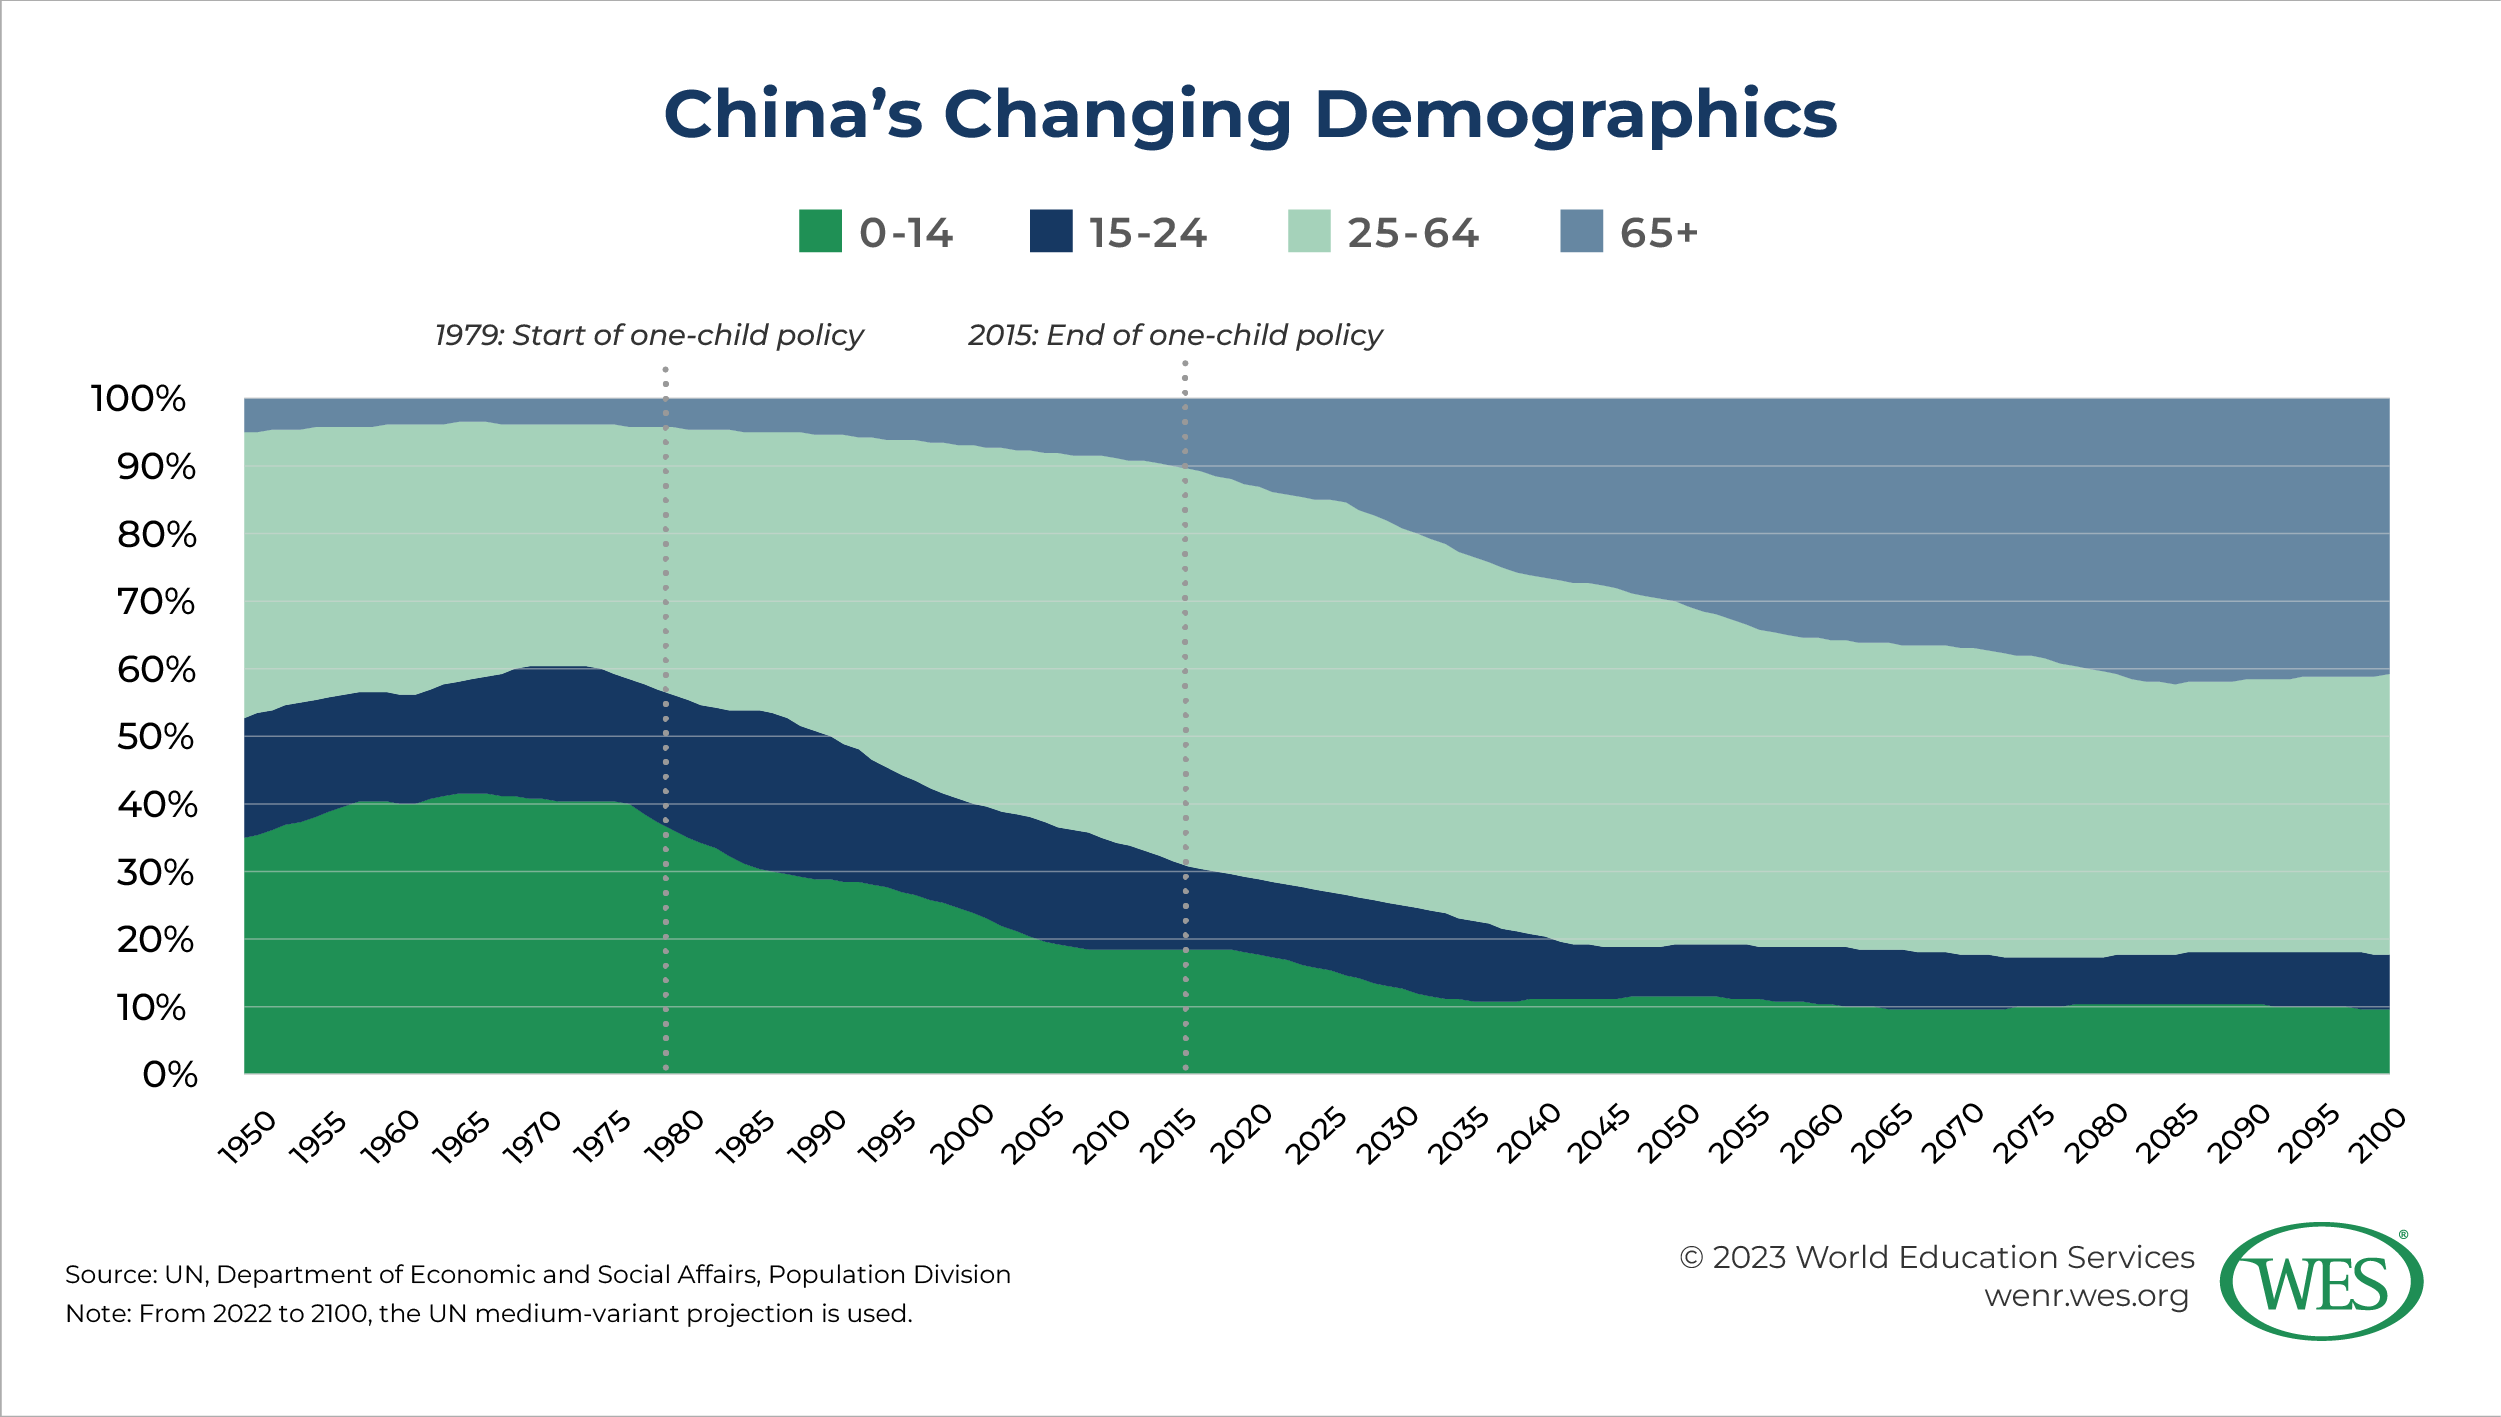 A chart showing China's changing demographics between 1950 and 2100. 